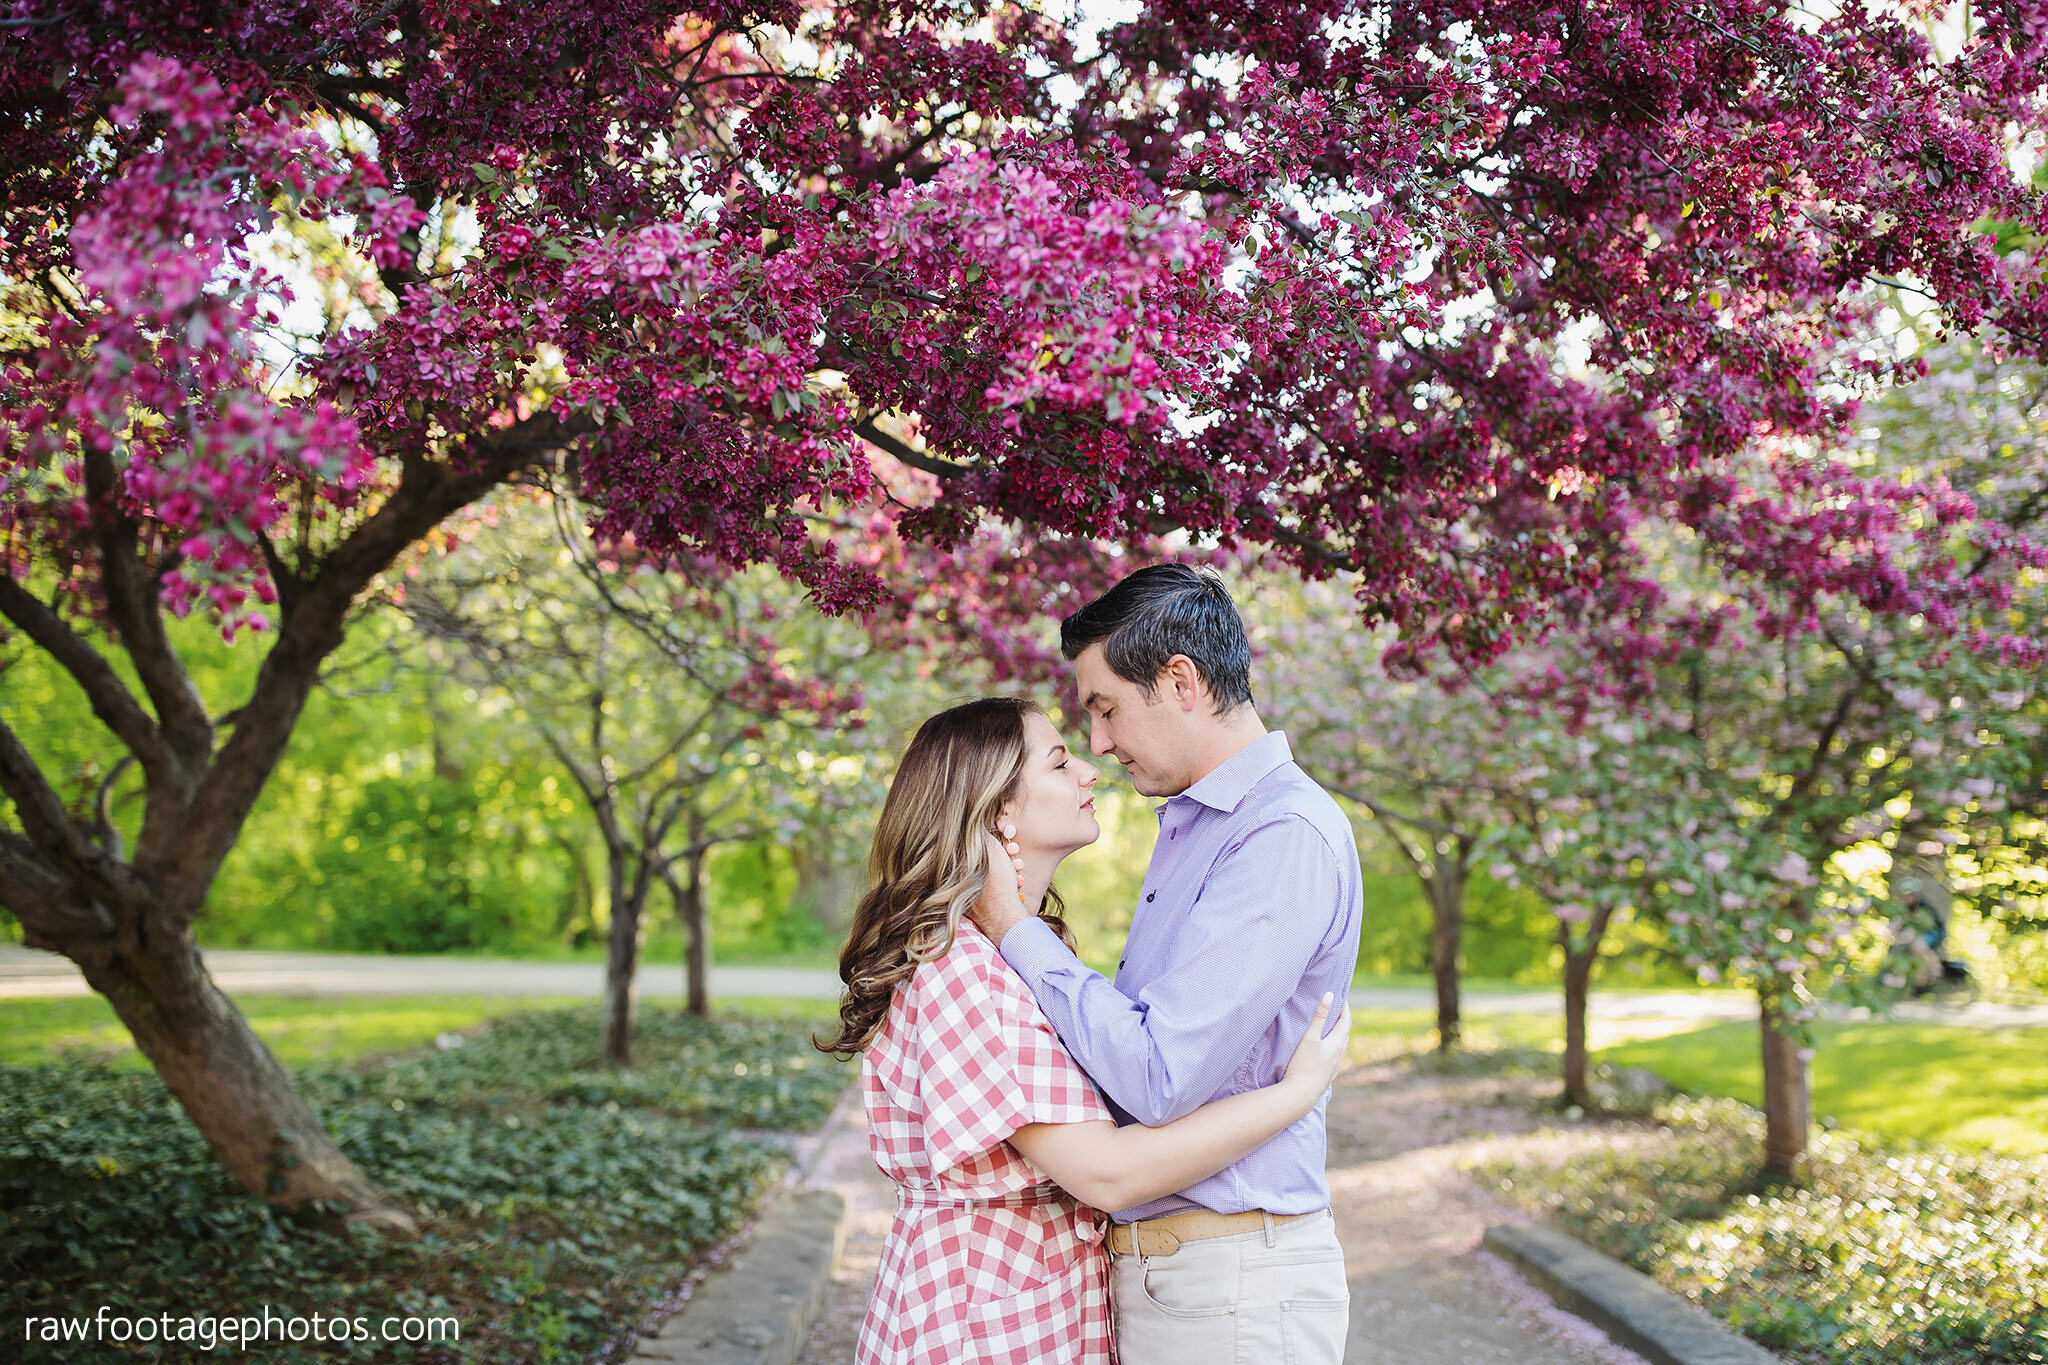 london_ontario_wedding_photographer-raw_footage_photography-spring_engagement_session-spring_blossoms-ivey_park_009.jpg